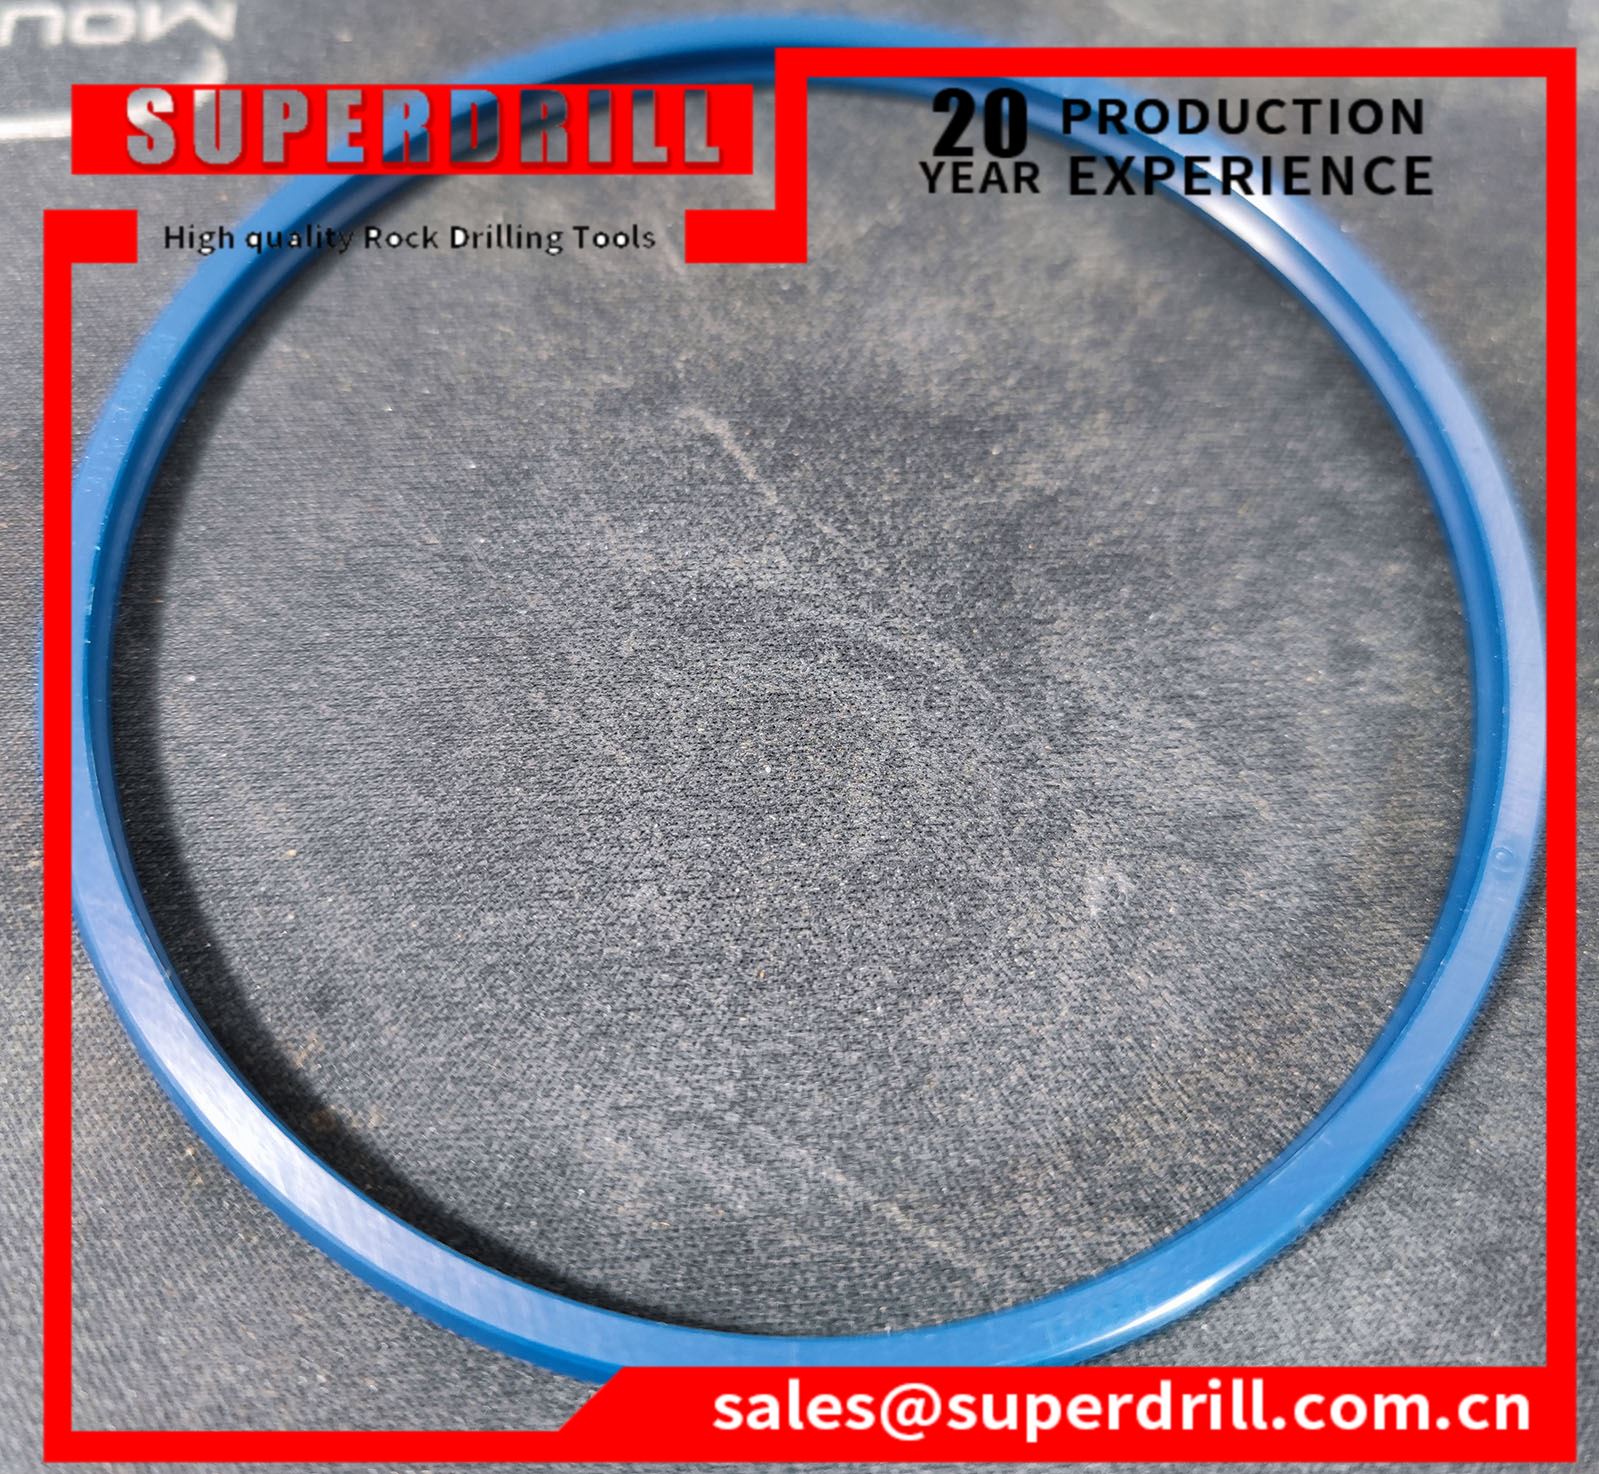 Pu83 Seal Ring /3115328923/ Cop 1838+ 1838hd+ 1838he+ 1838mux+ 1840+ 2238hd+ 2550+ 2560+/ Drilling Rig Parts